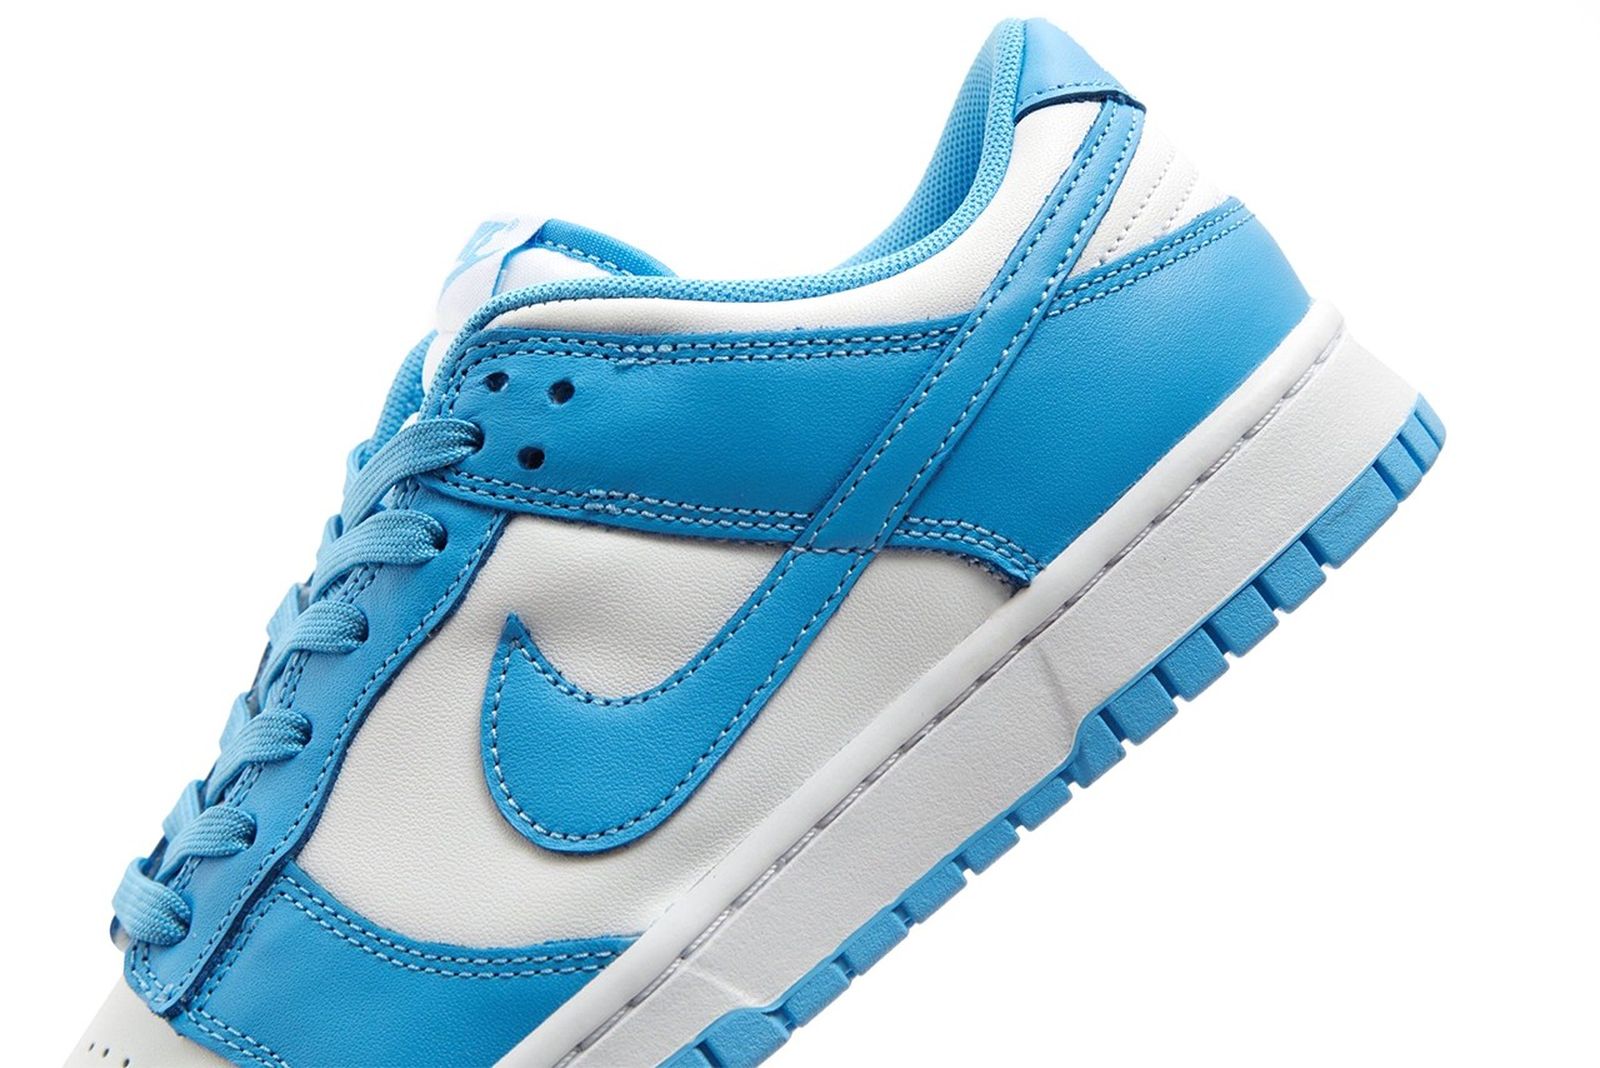 Nike Dunk university blue low dunks Low "University Blue": Official Images & Rumored Info